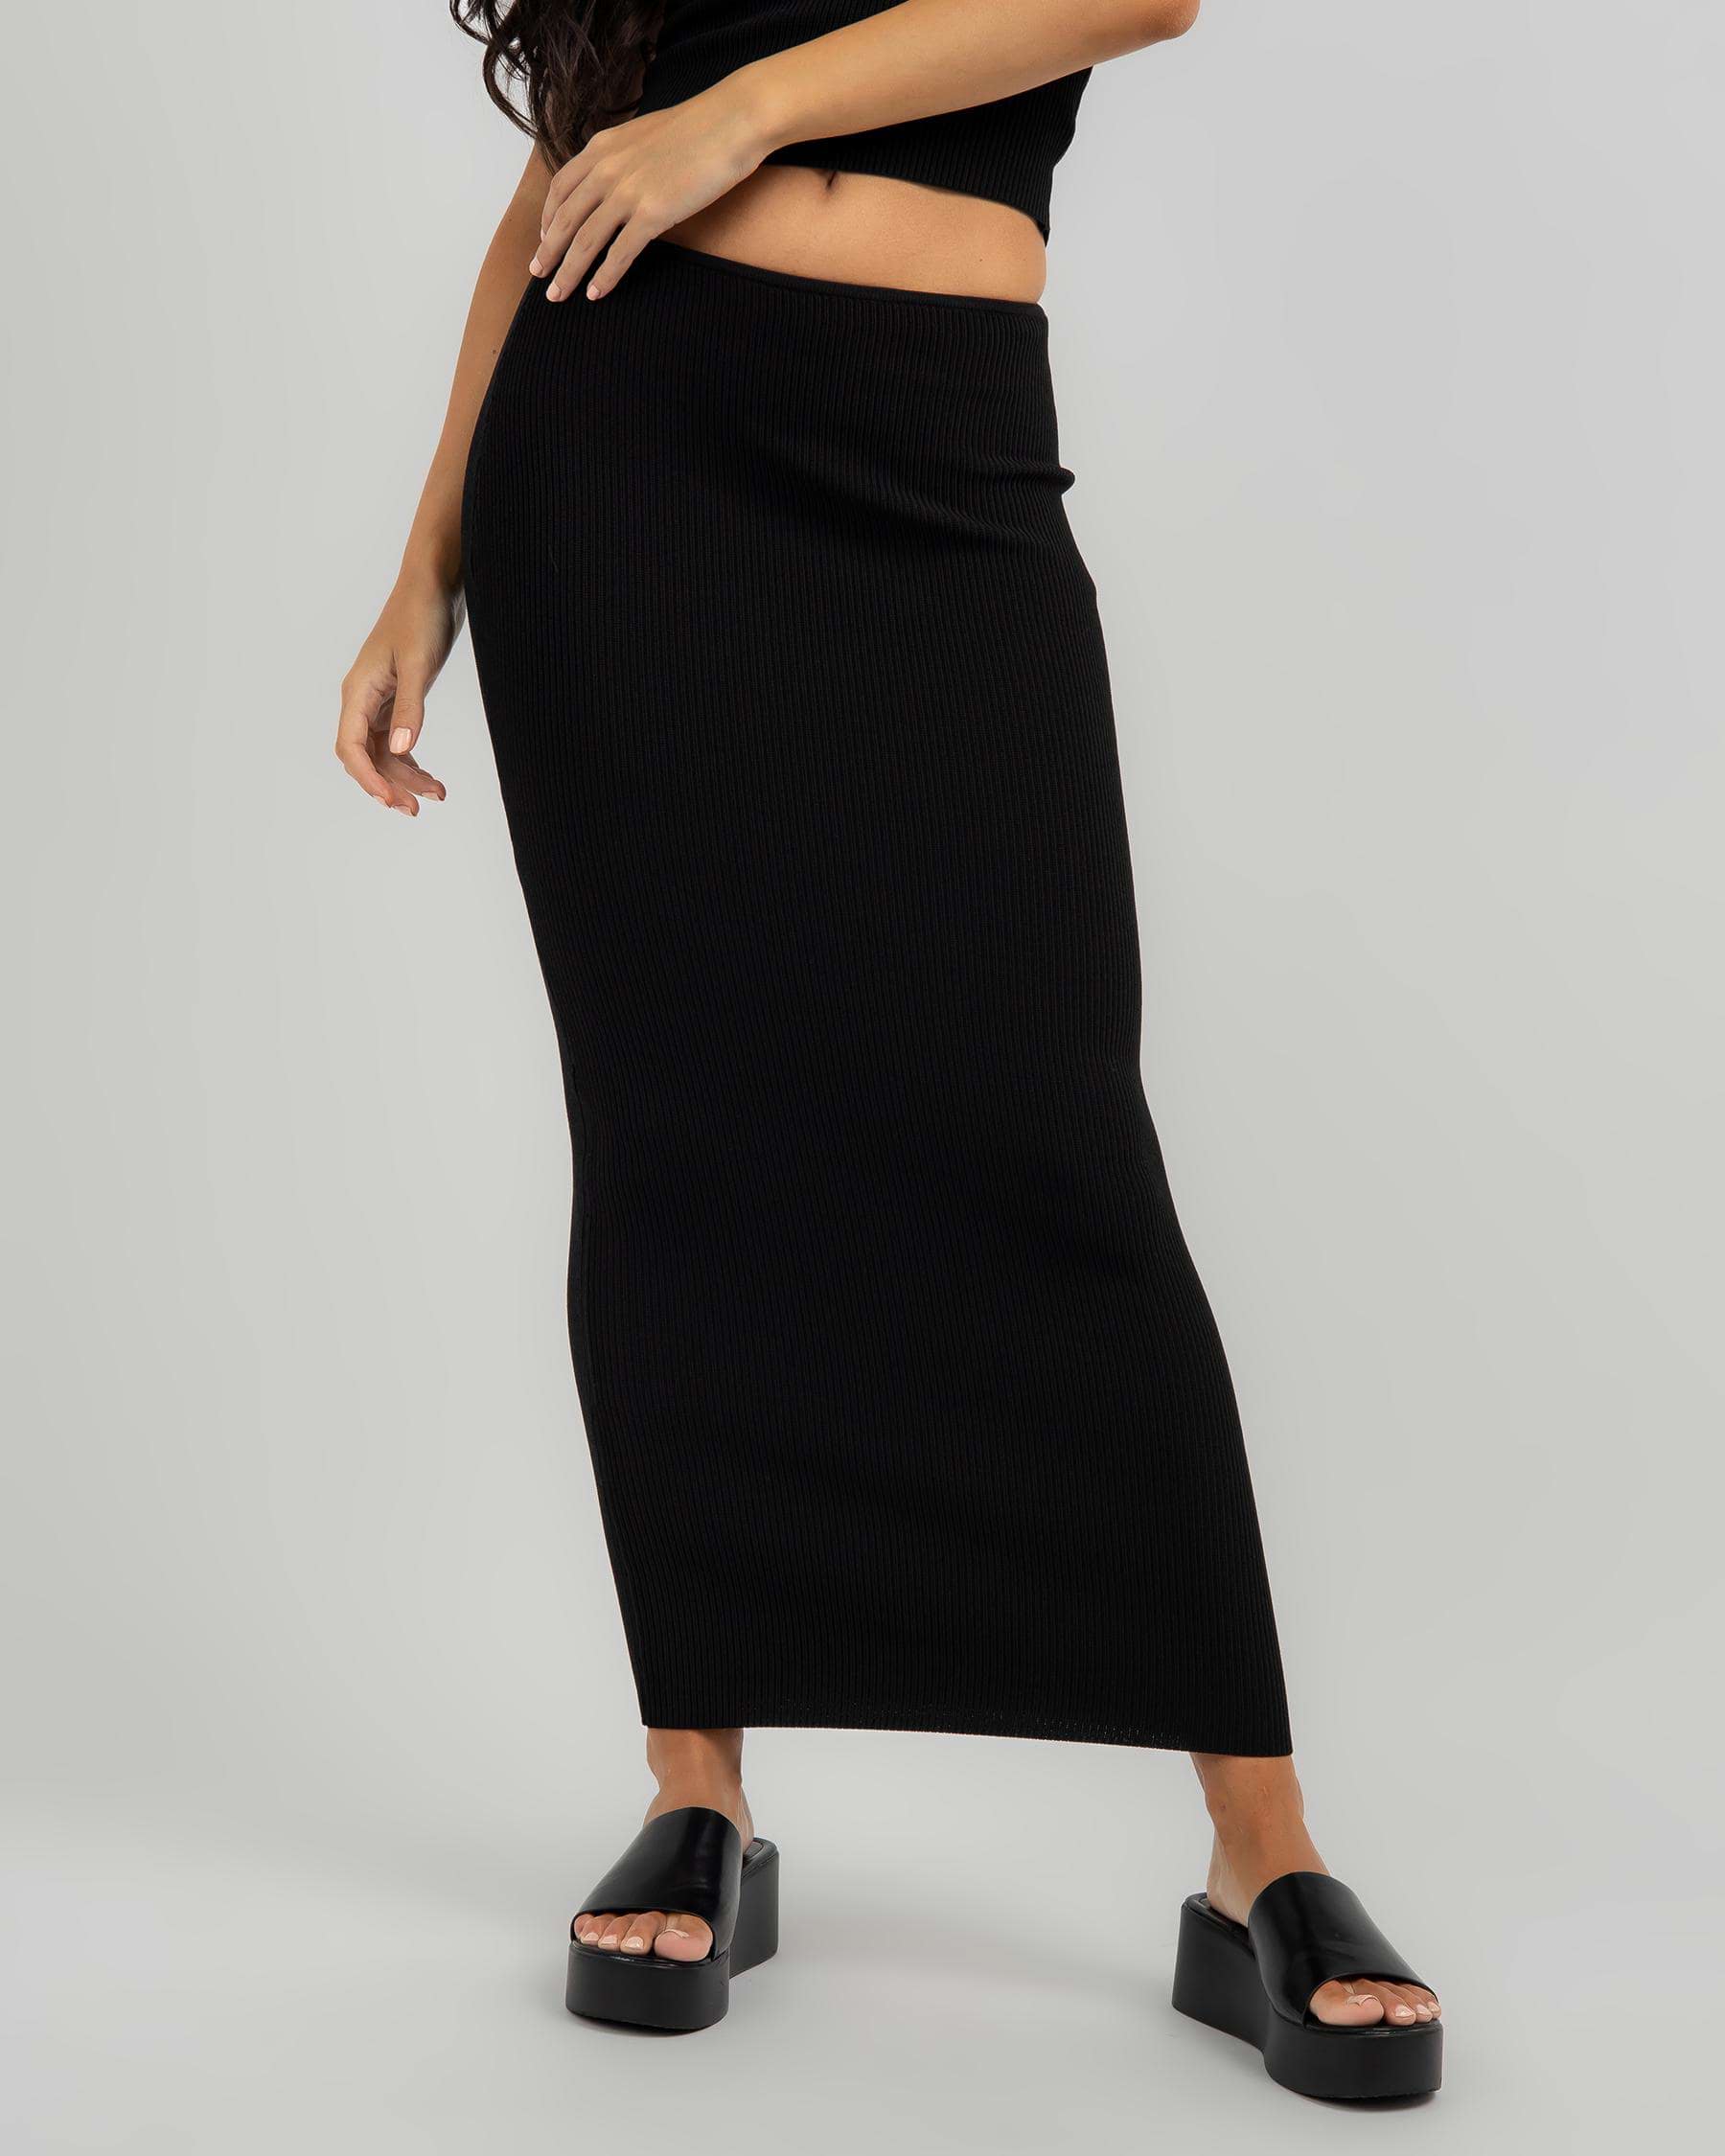 Shop Ava And Ever Bianca Maxi Skirt In Black - Fast Shipping & Easy ...